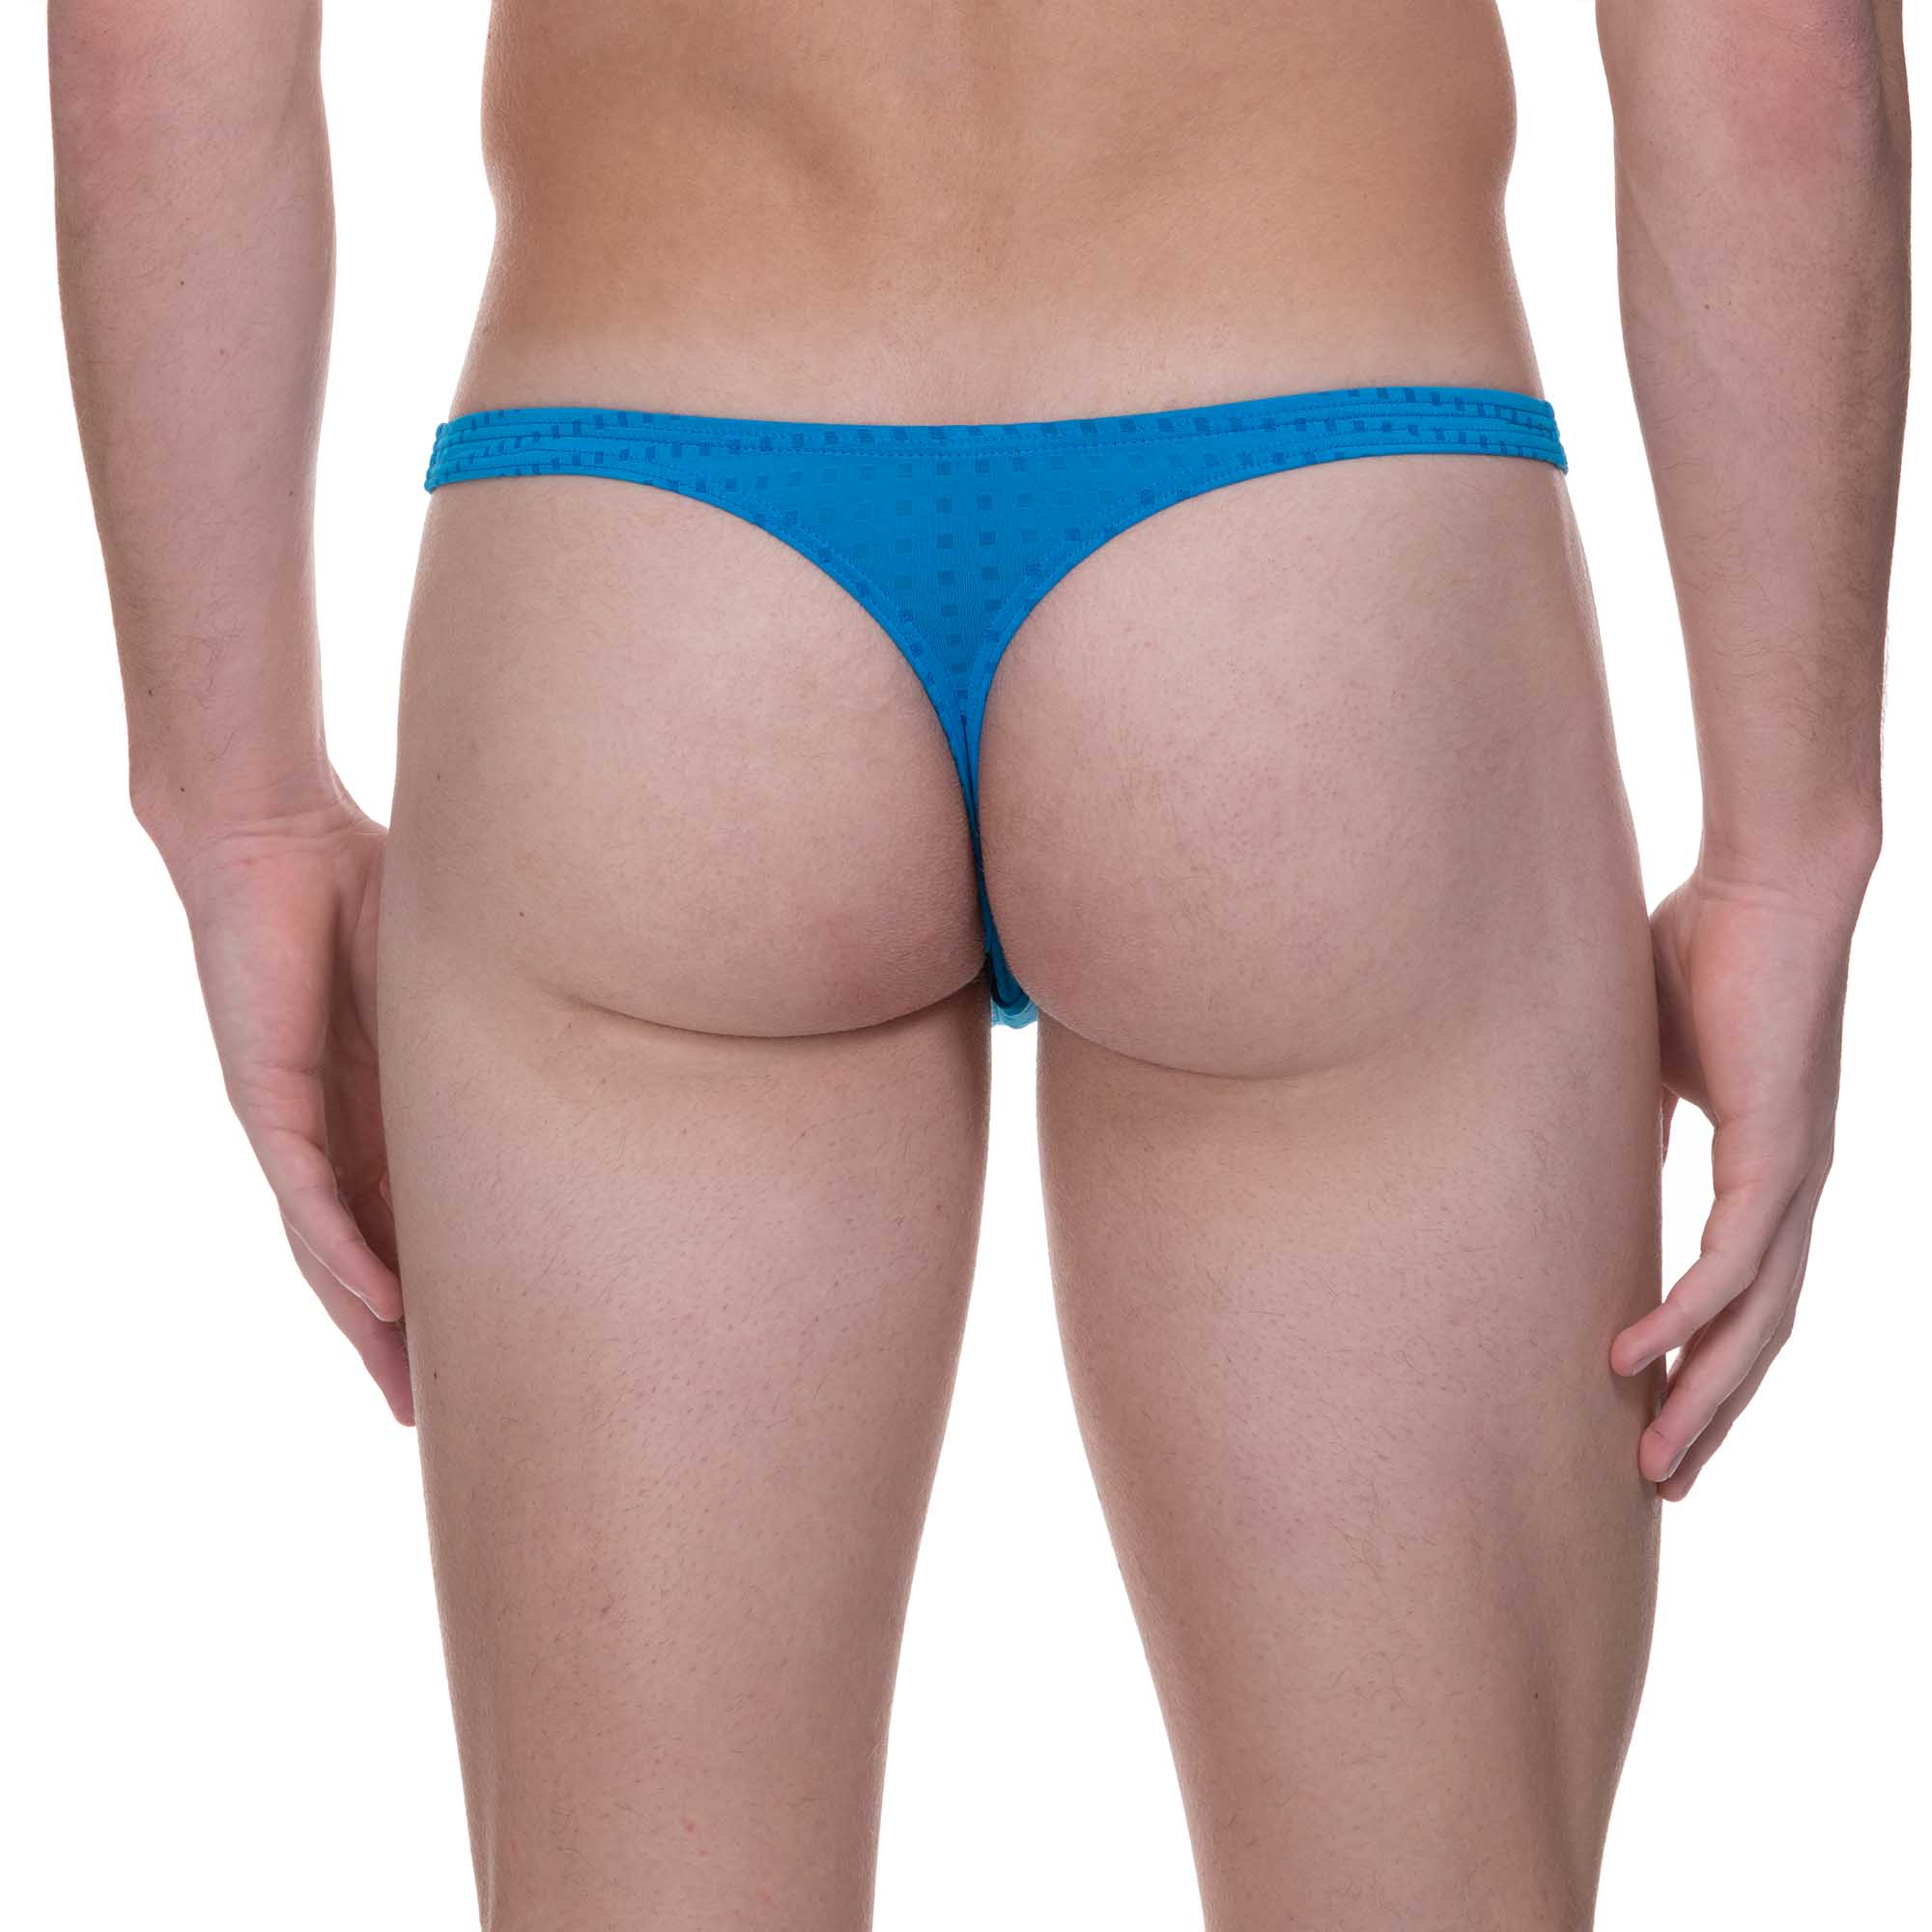 Top 5 questions men ask about thongs.